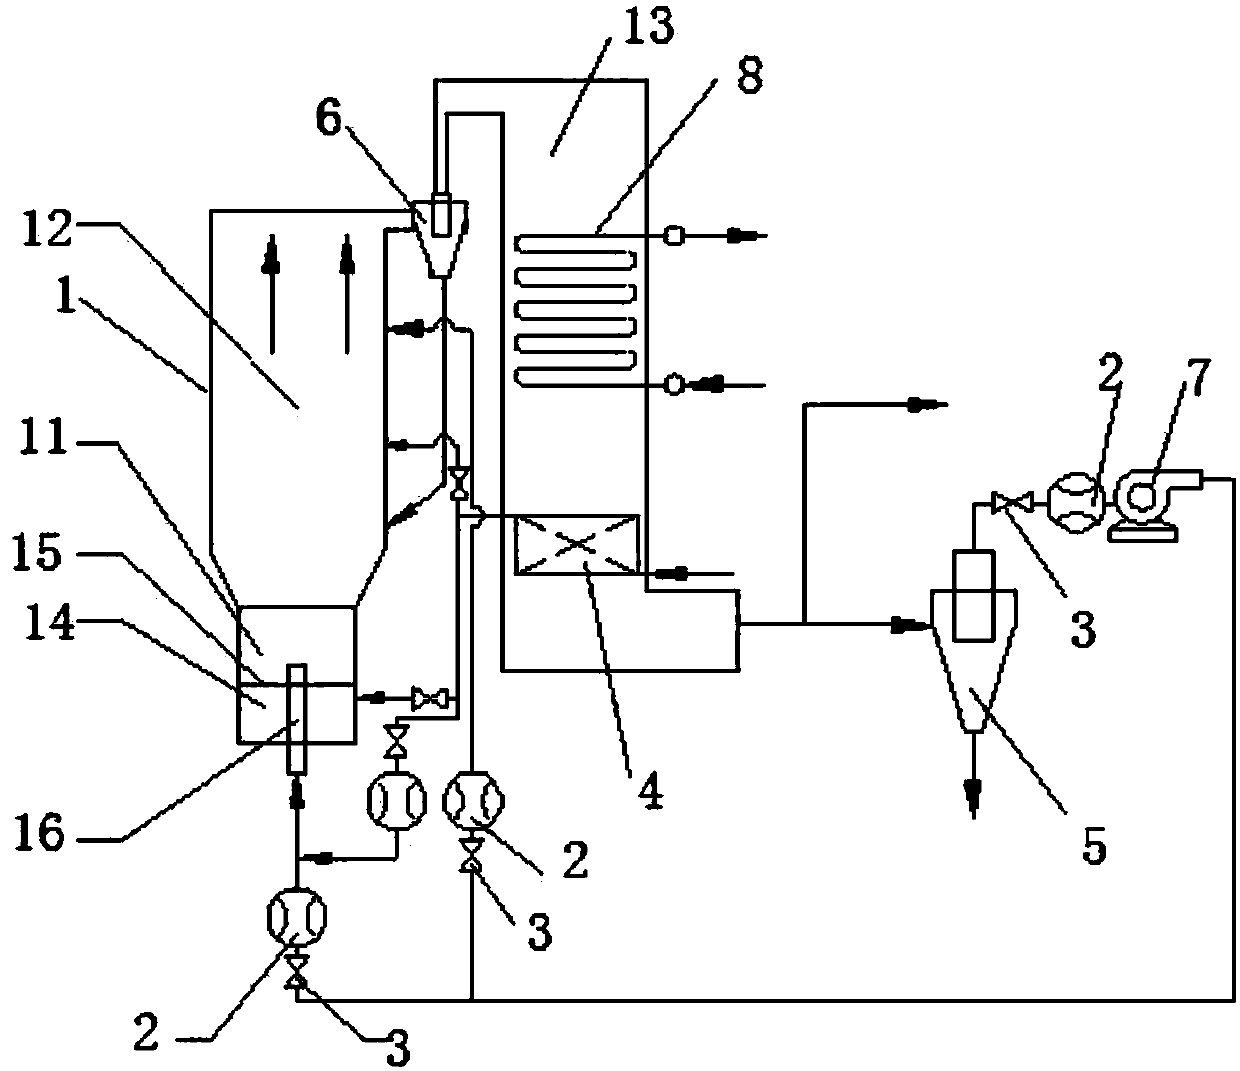 Flue gas circulating sludge spouting fluidized bed incineration system and method